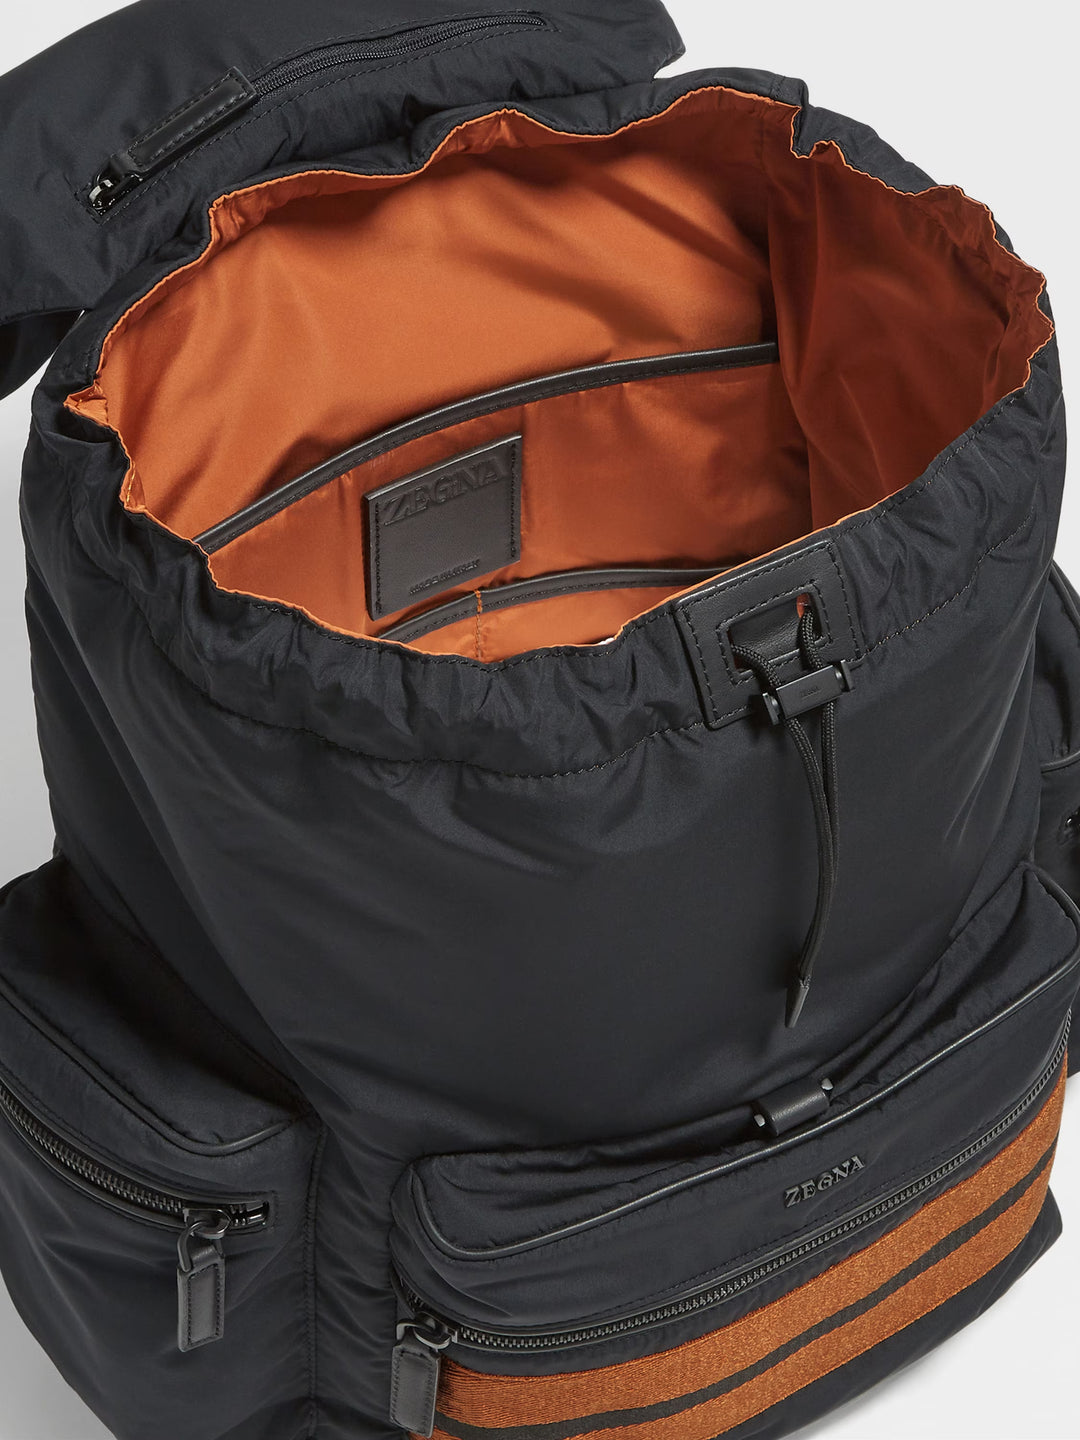 Zegna Technical Special Backpack in Black